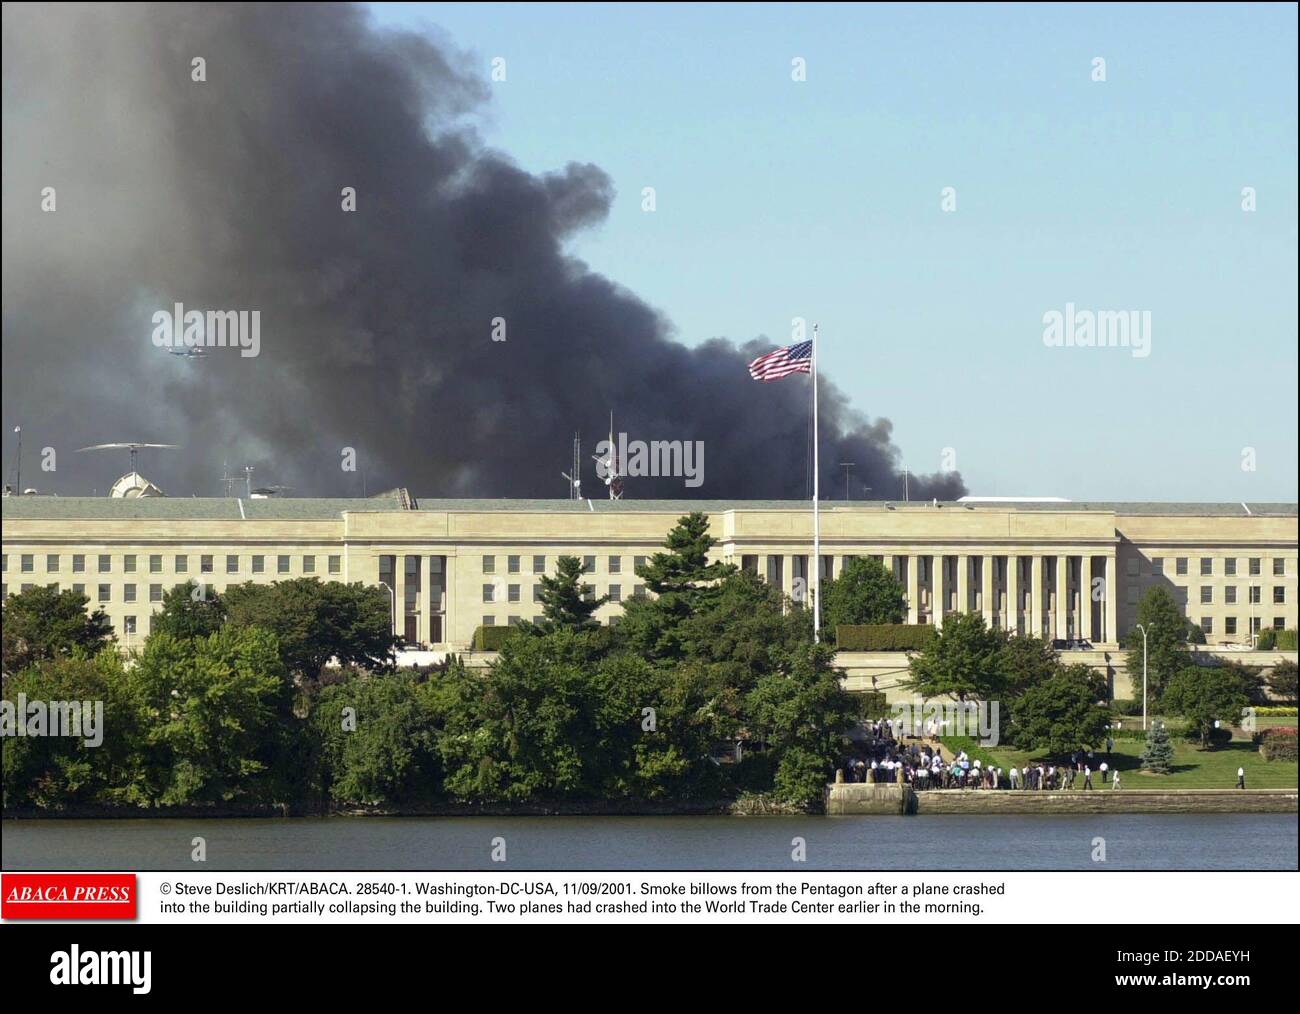 NO FILM, NO VIDEO, NO TV, NO DOCUMENTARY - © Steve Deslich/KRT/ABACA. 28540-1. Washington-DC-USA, 11/09/2001. Smoke billows from the Pentagon after a plane crashed into the building partially collapsing the building. Two planes had crashed into the World Trade Center earlier in the morning. Stock Photo